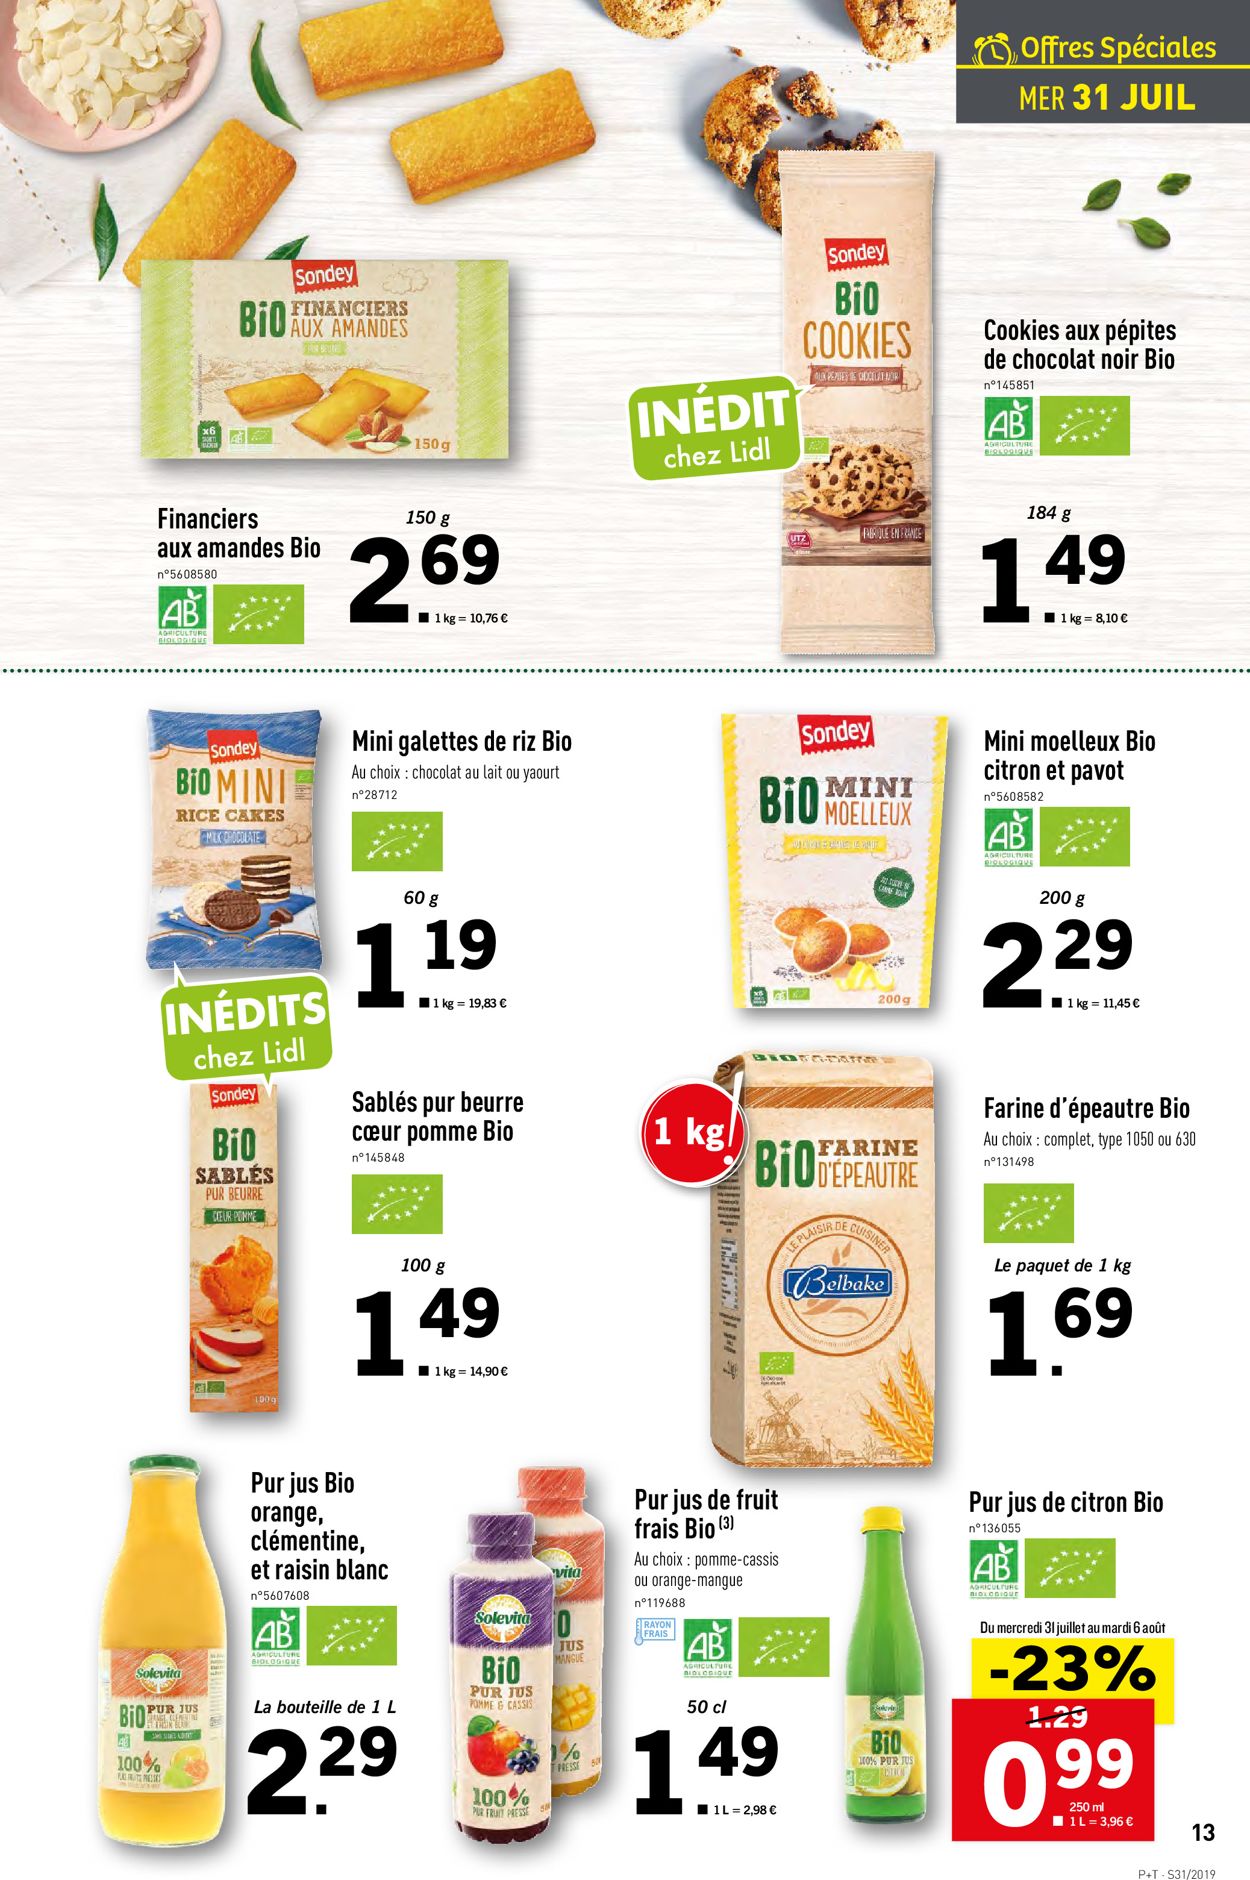 Lidl Catalogue - 31.07-06.08.2019 (Page 13)